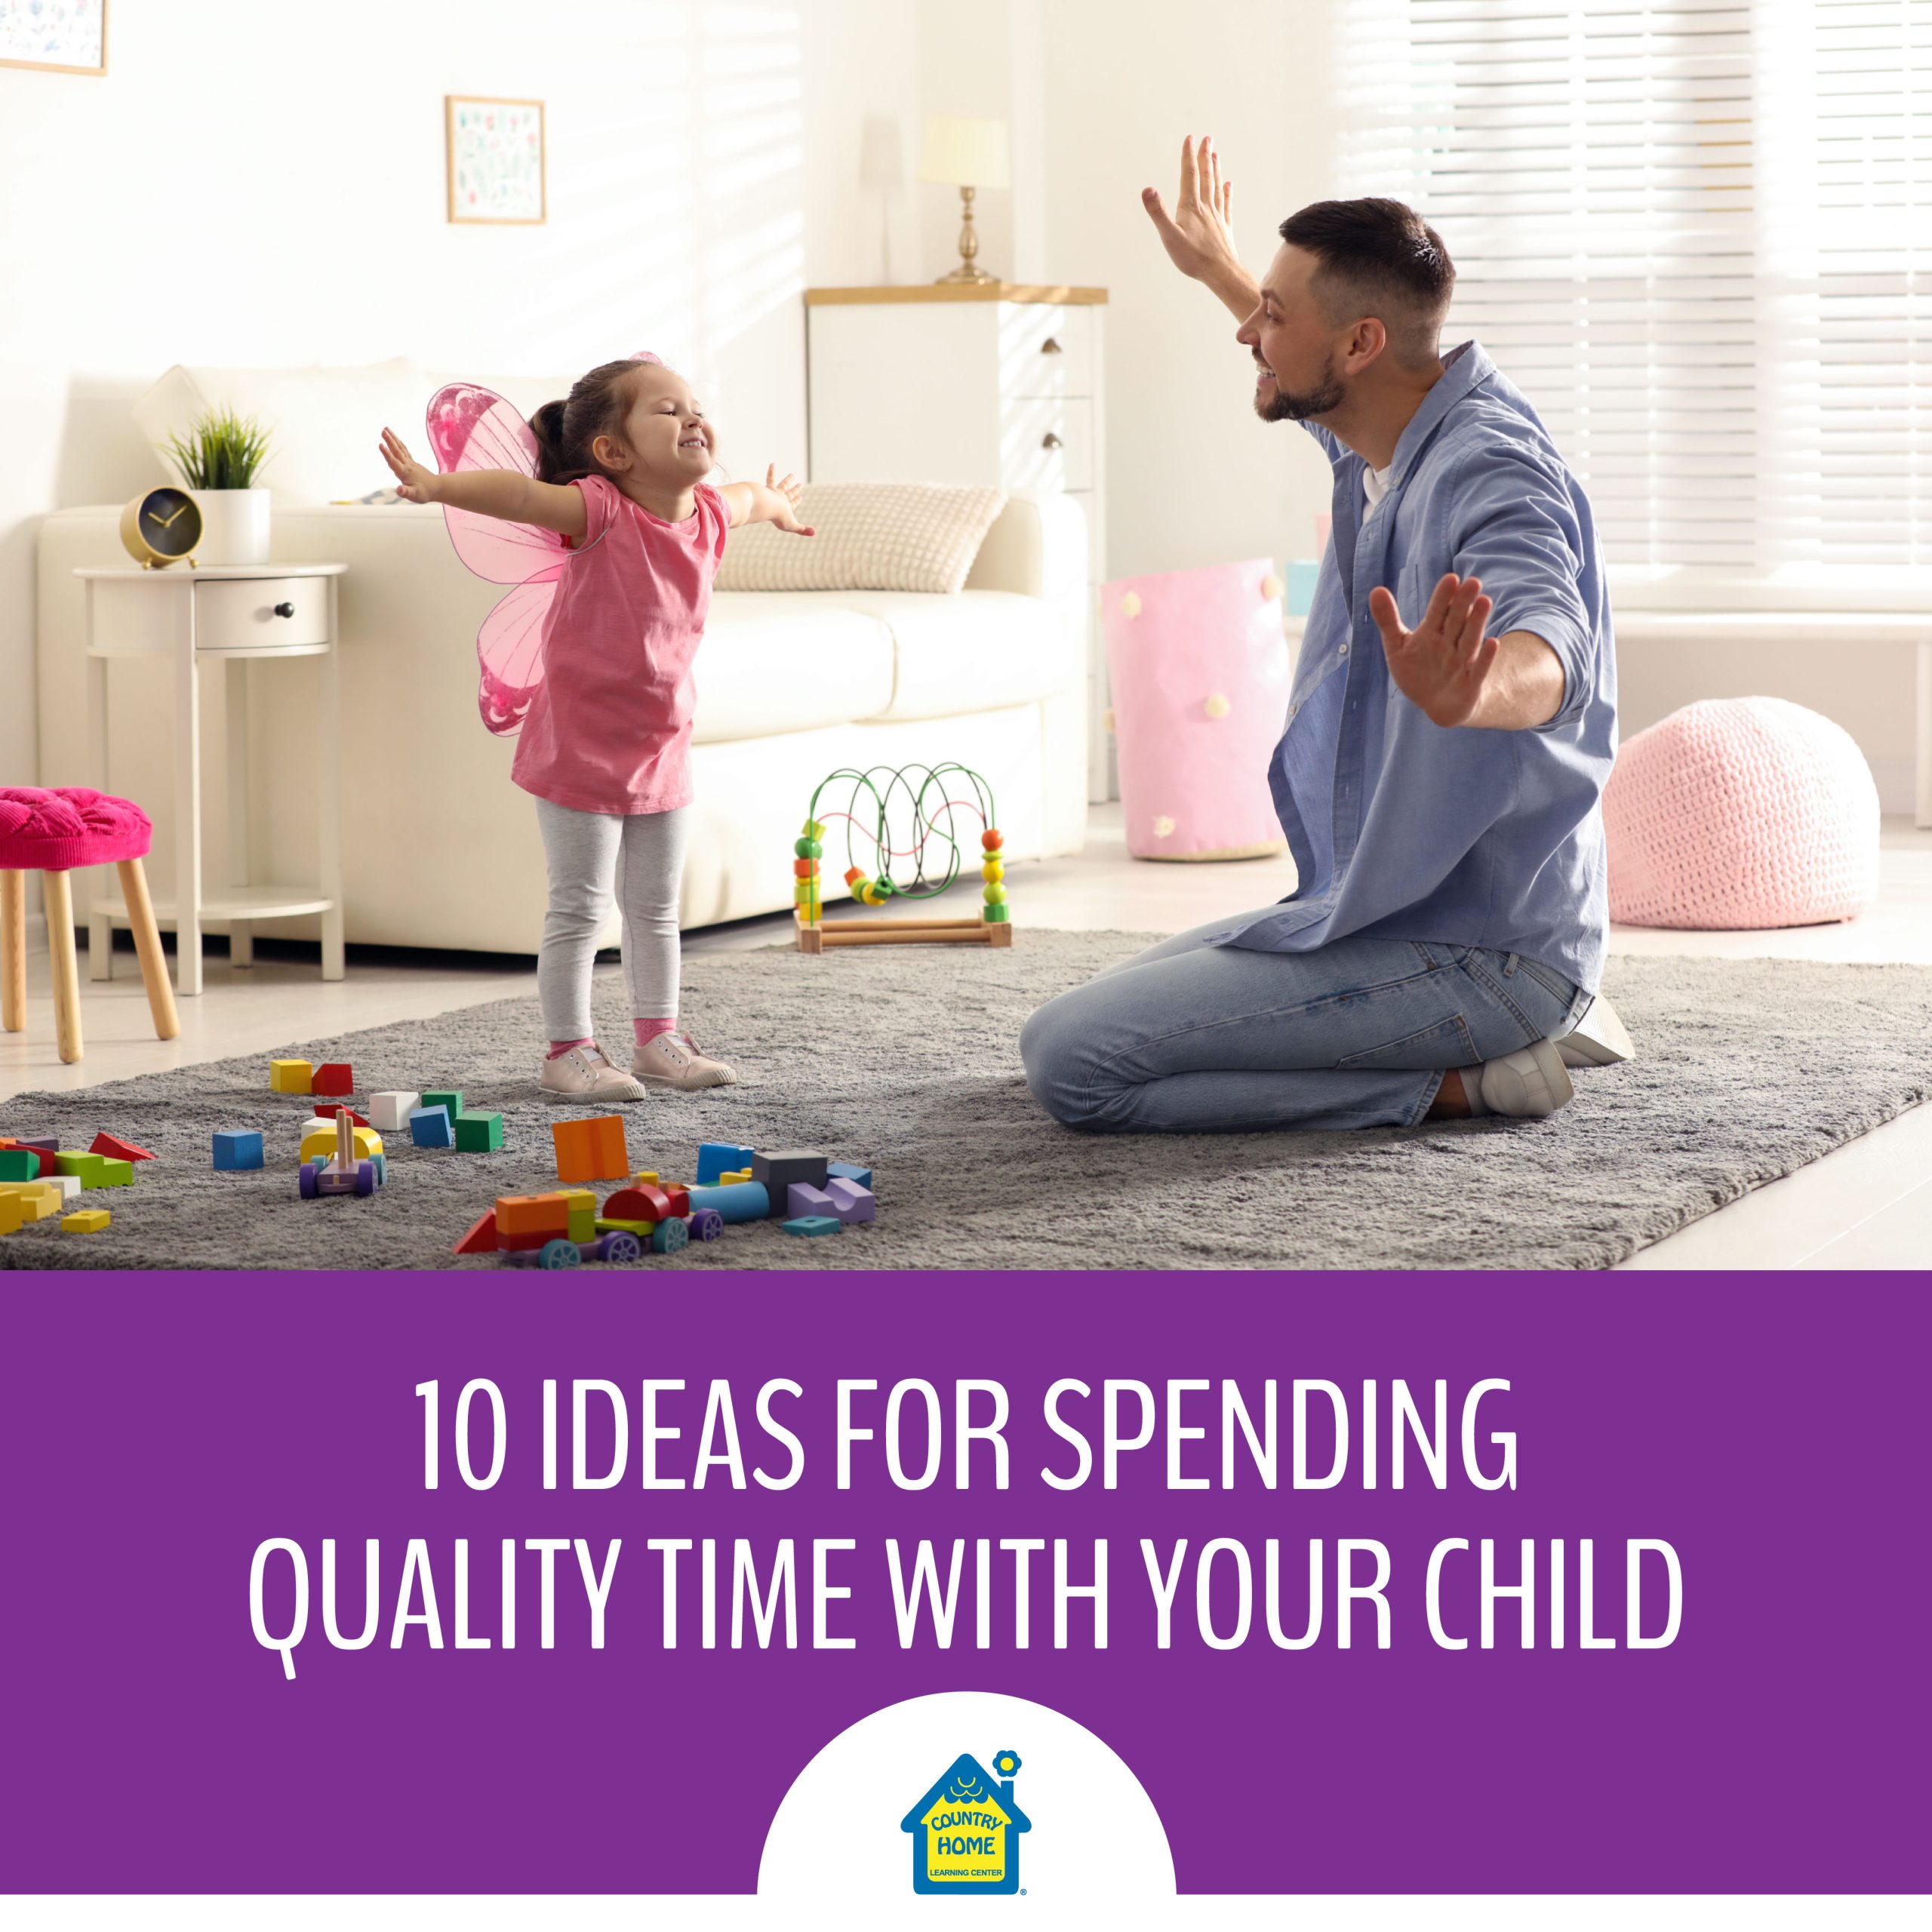 Ideas for Quality Time with Child